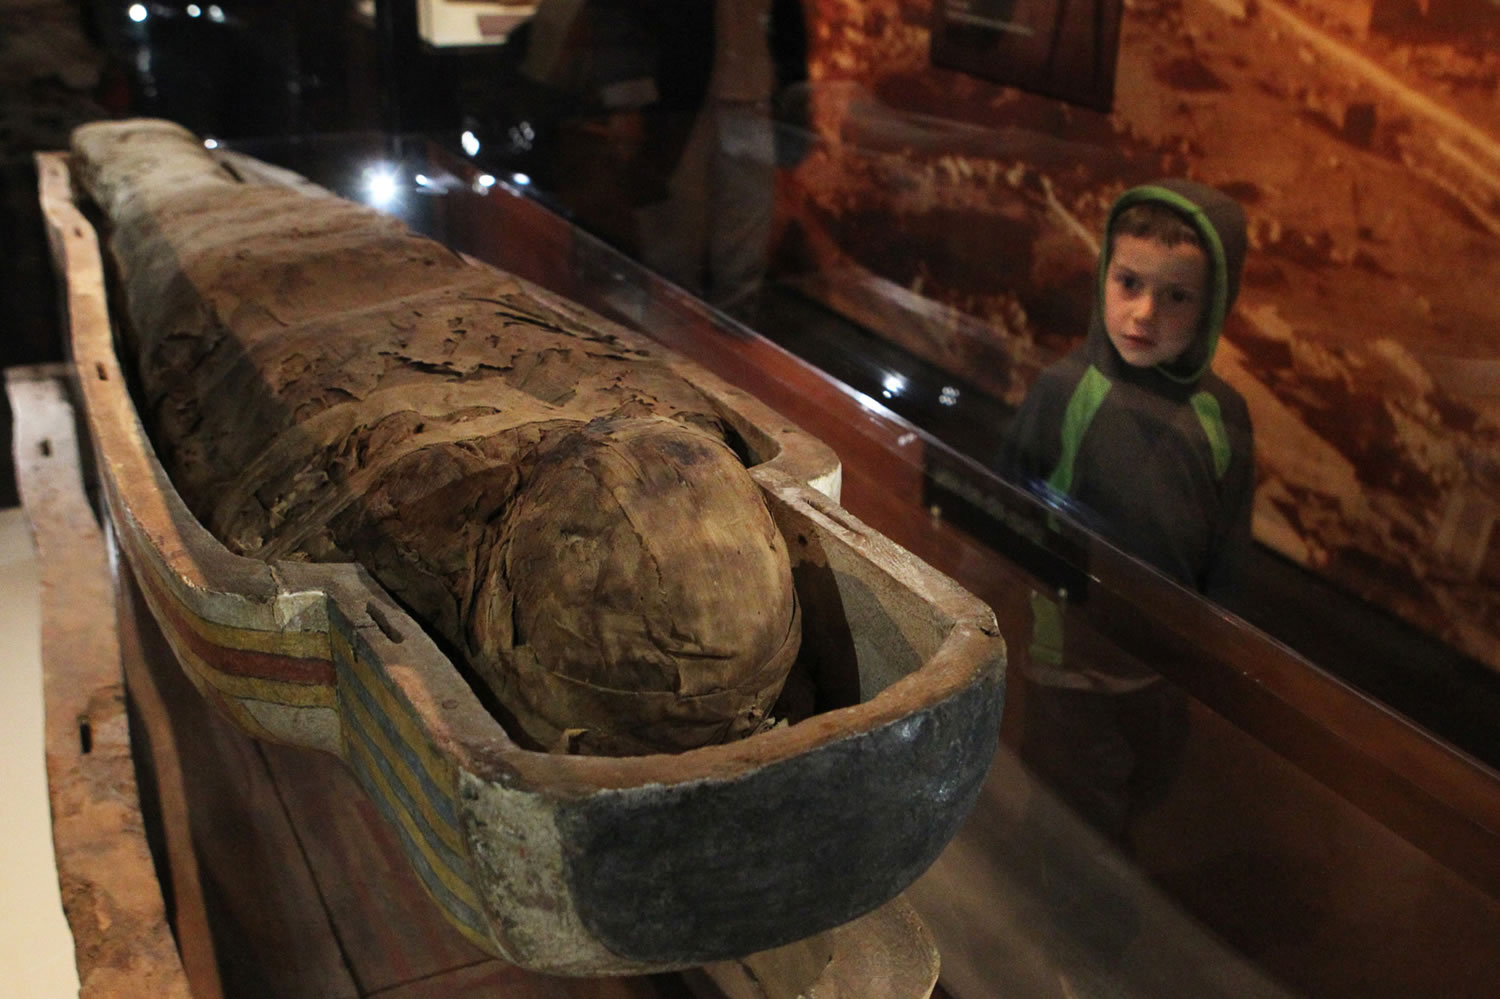 Pascual Carrasco, 4, looks up at the mummy of an Egyptian priest in the &quot;Mummies of the World&quot; exhibition at the Oregon Museum of Science and Industry. The exhibition will run through Sept.